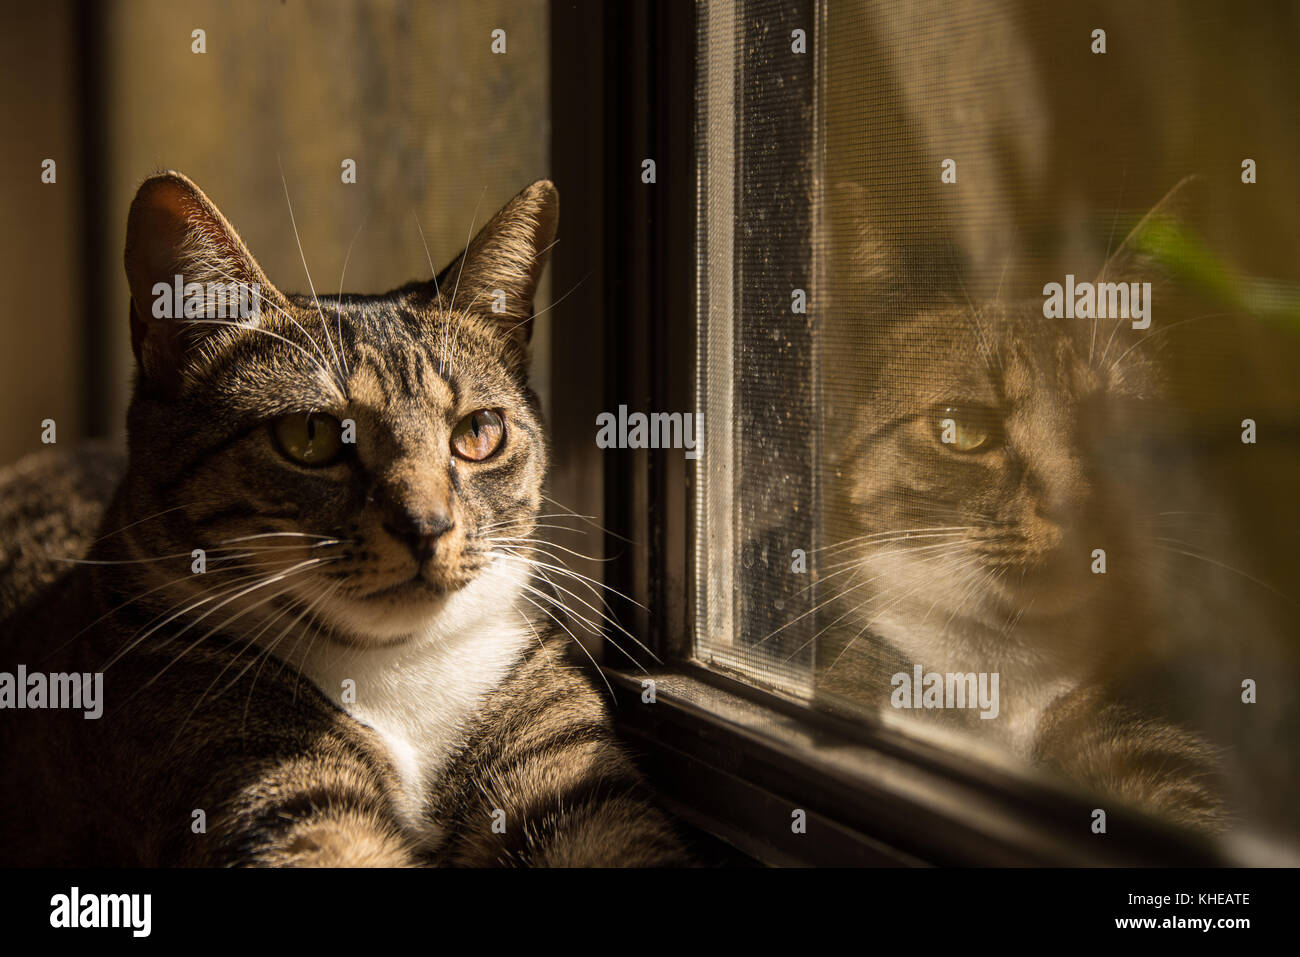 Cat Reflection In Window Stock Photo